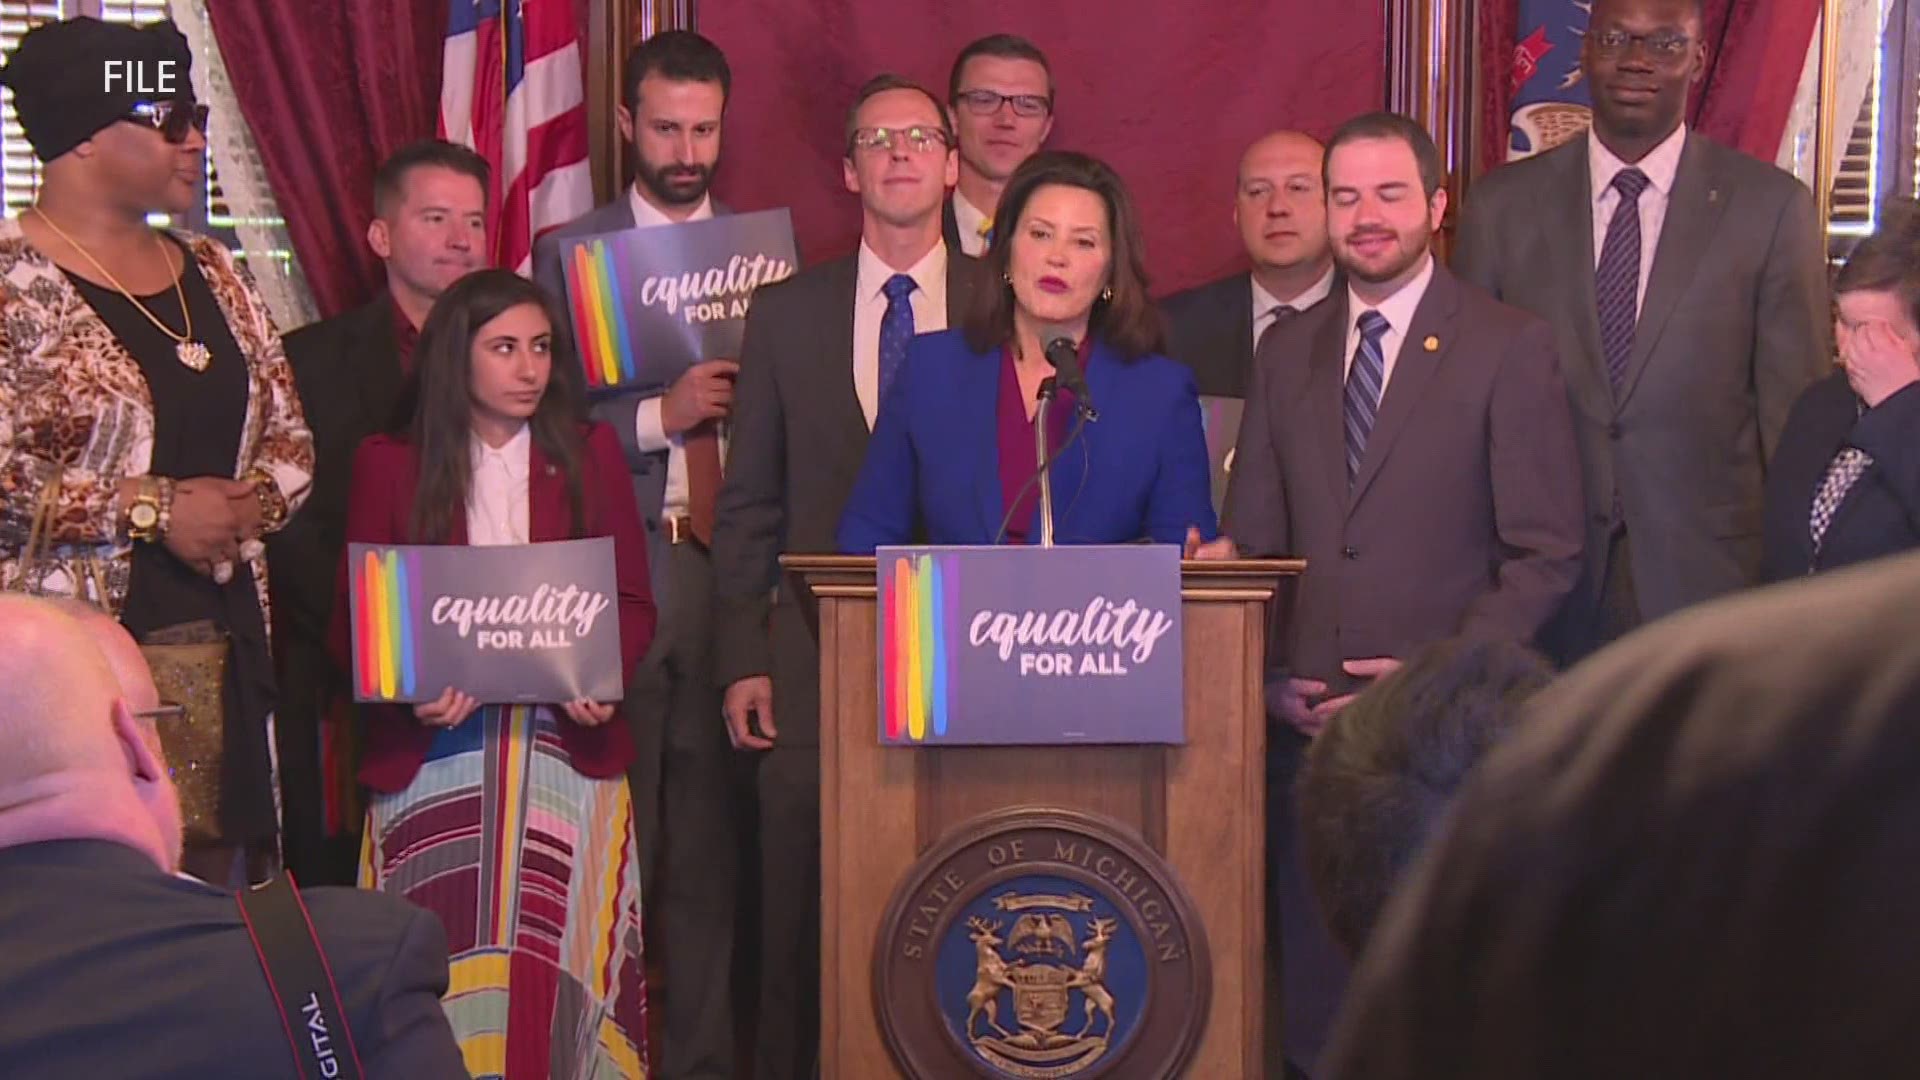 Two Democratic state legislators say LGBTQ protections will be added to Michigan’s civil rights laws through the legislative process or voter approval.